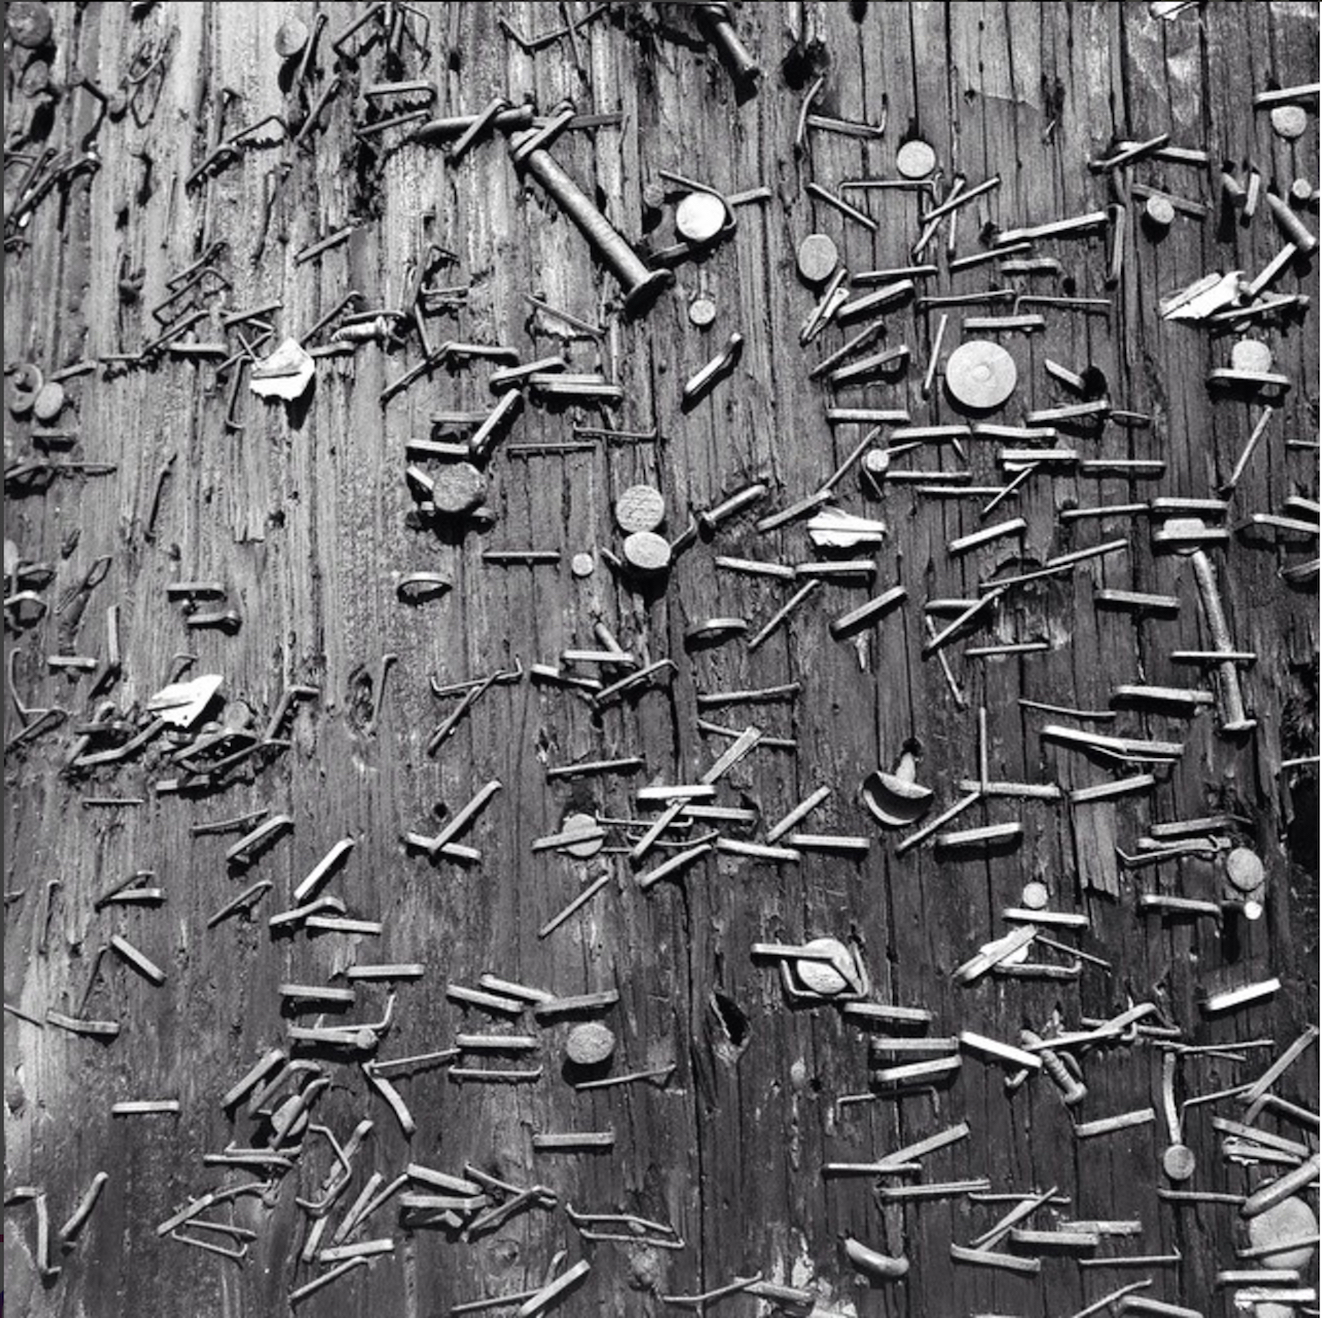 telephone pole with nails